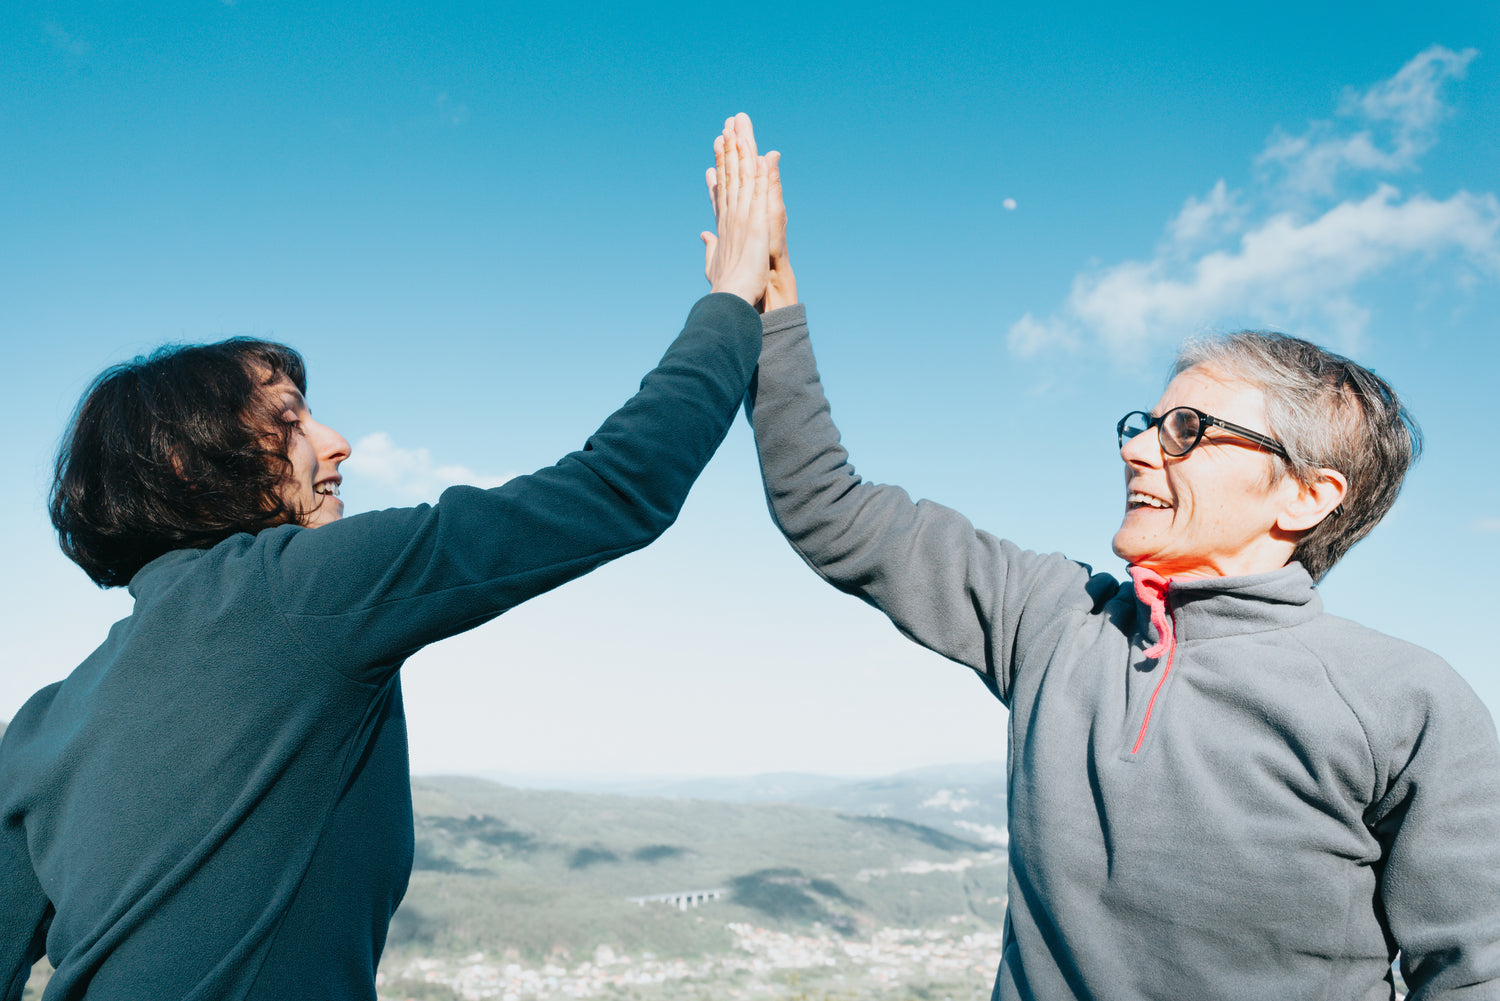 Two women giving a high five, with an open sky behind them.